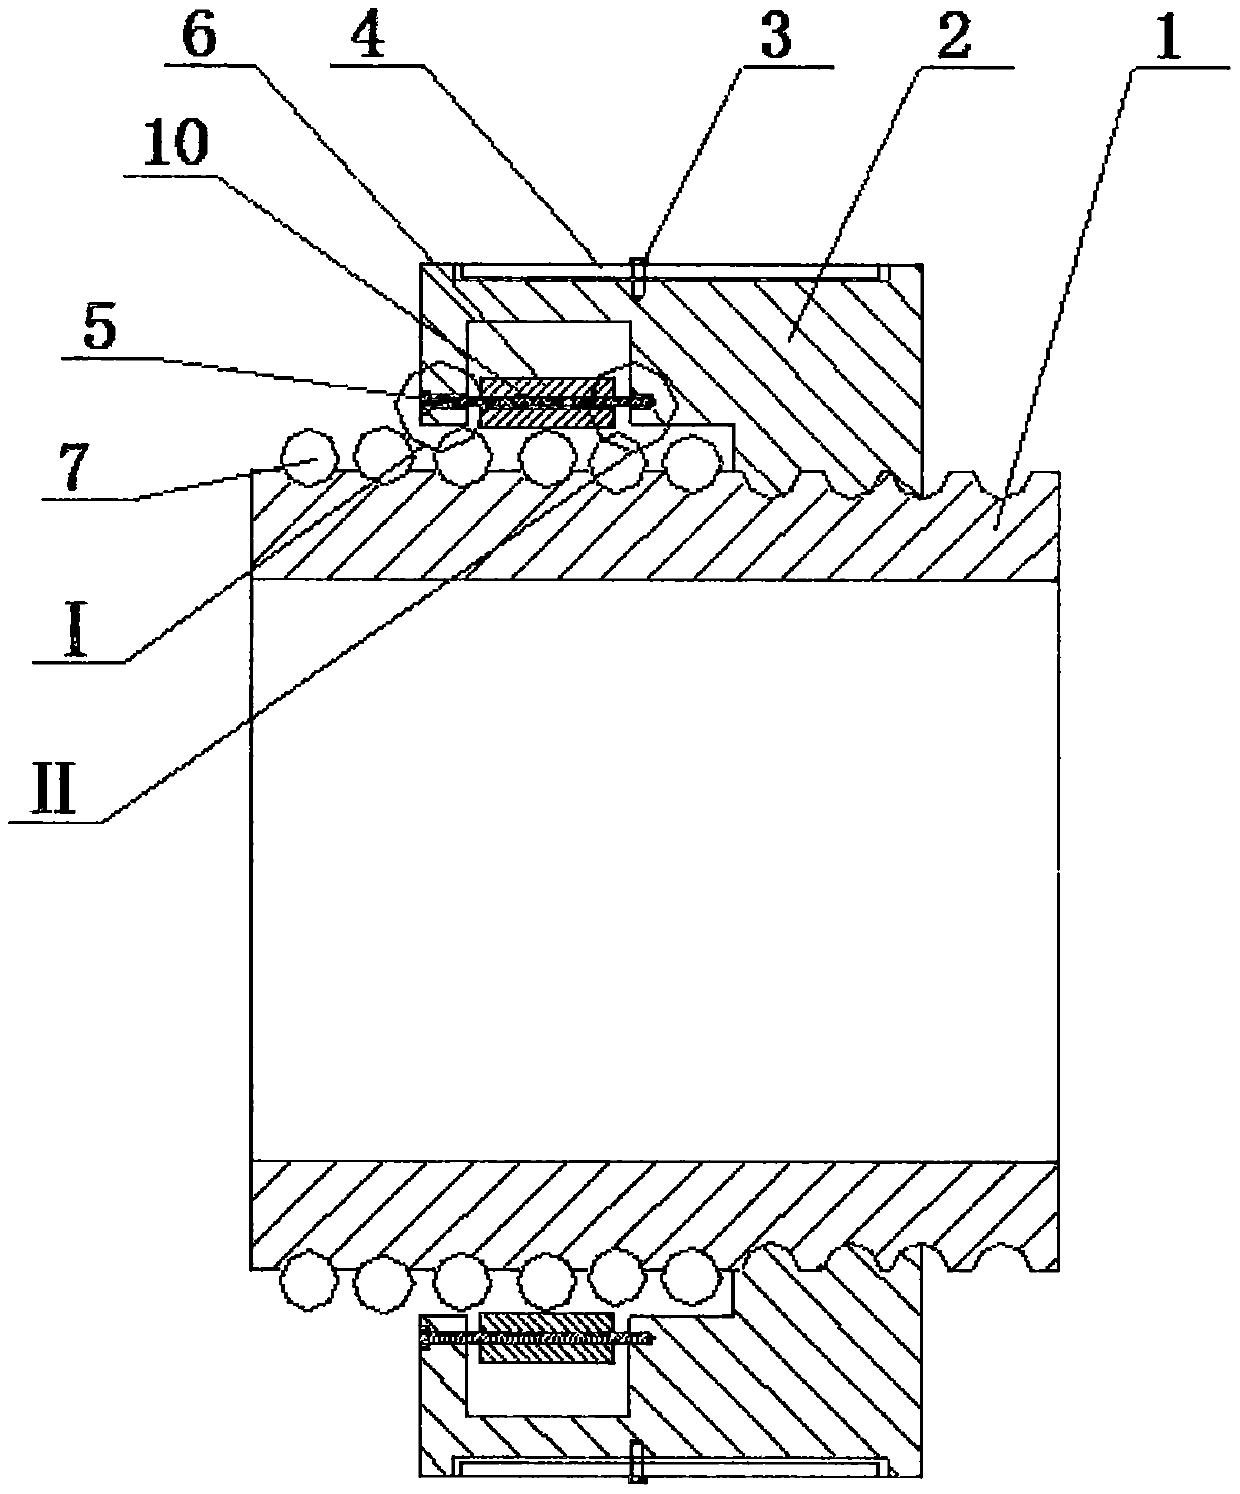 Rope guide for electric hoist